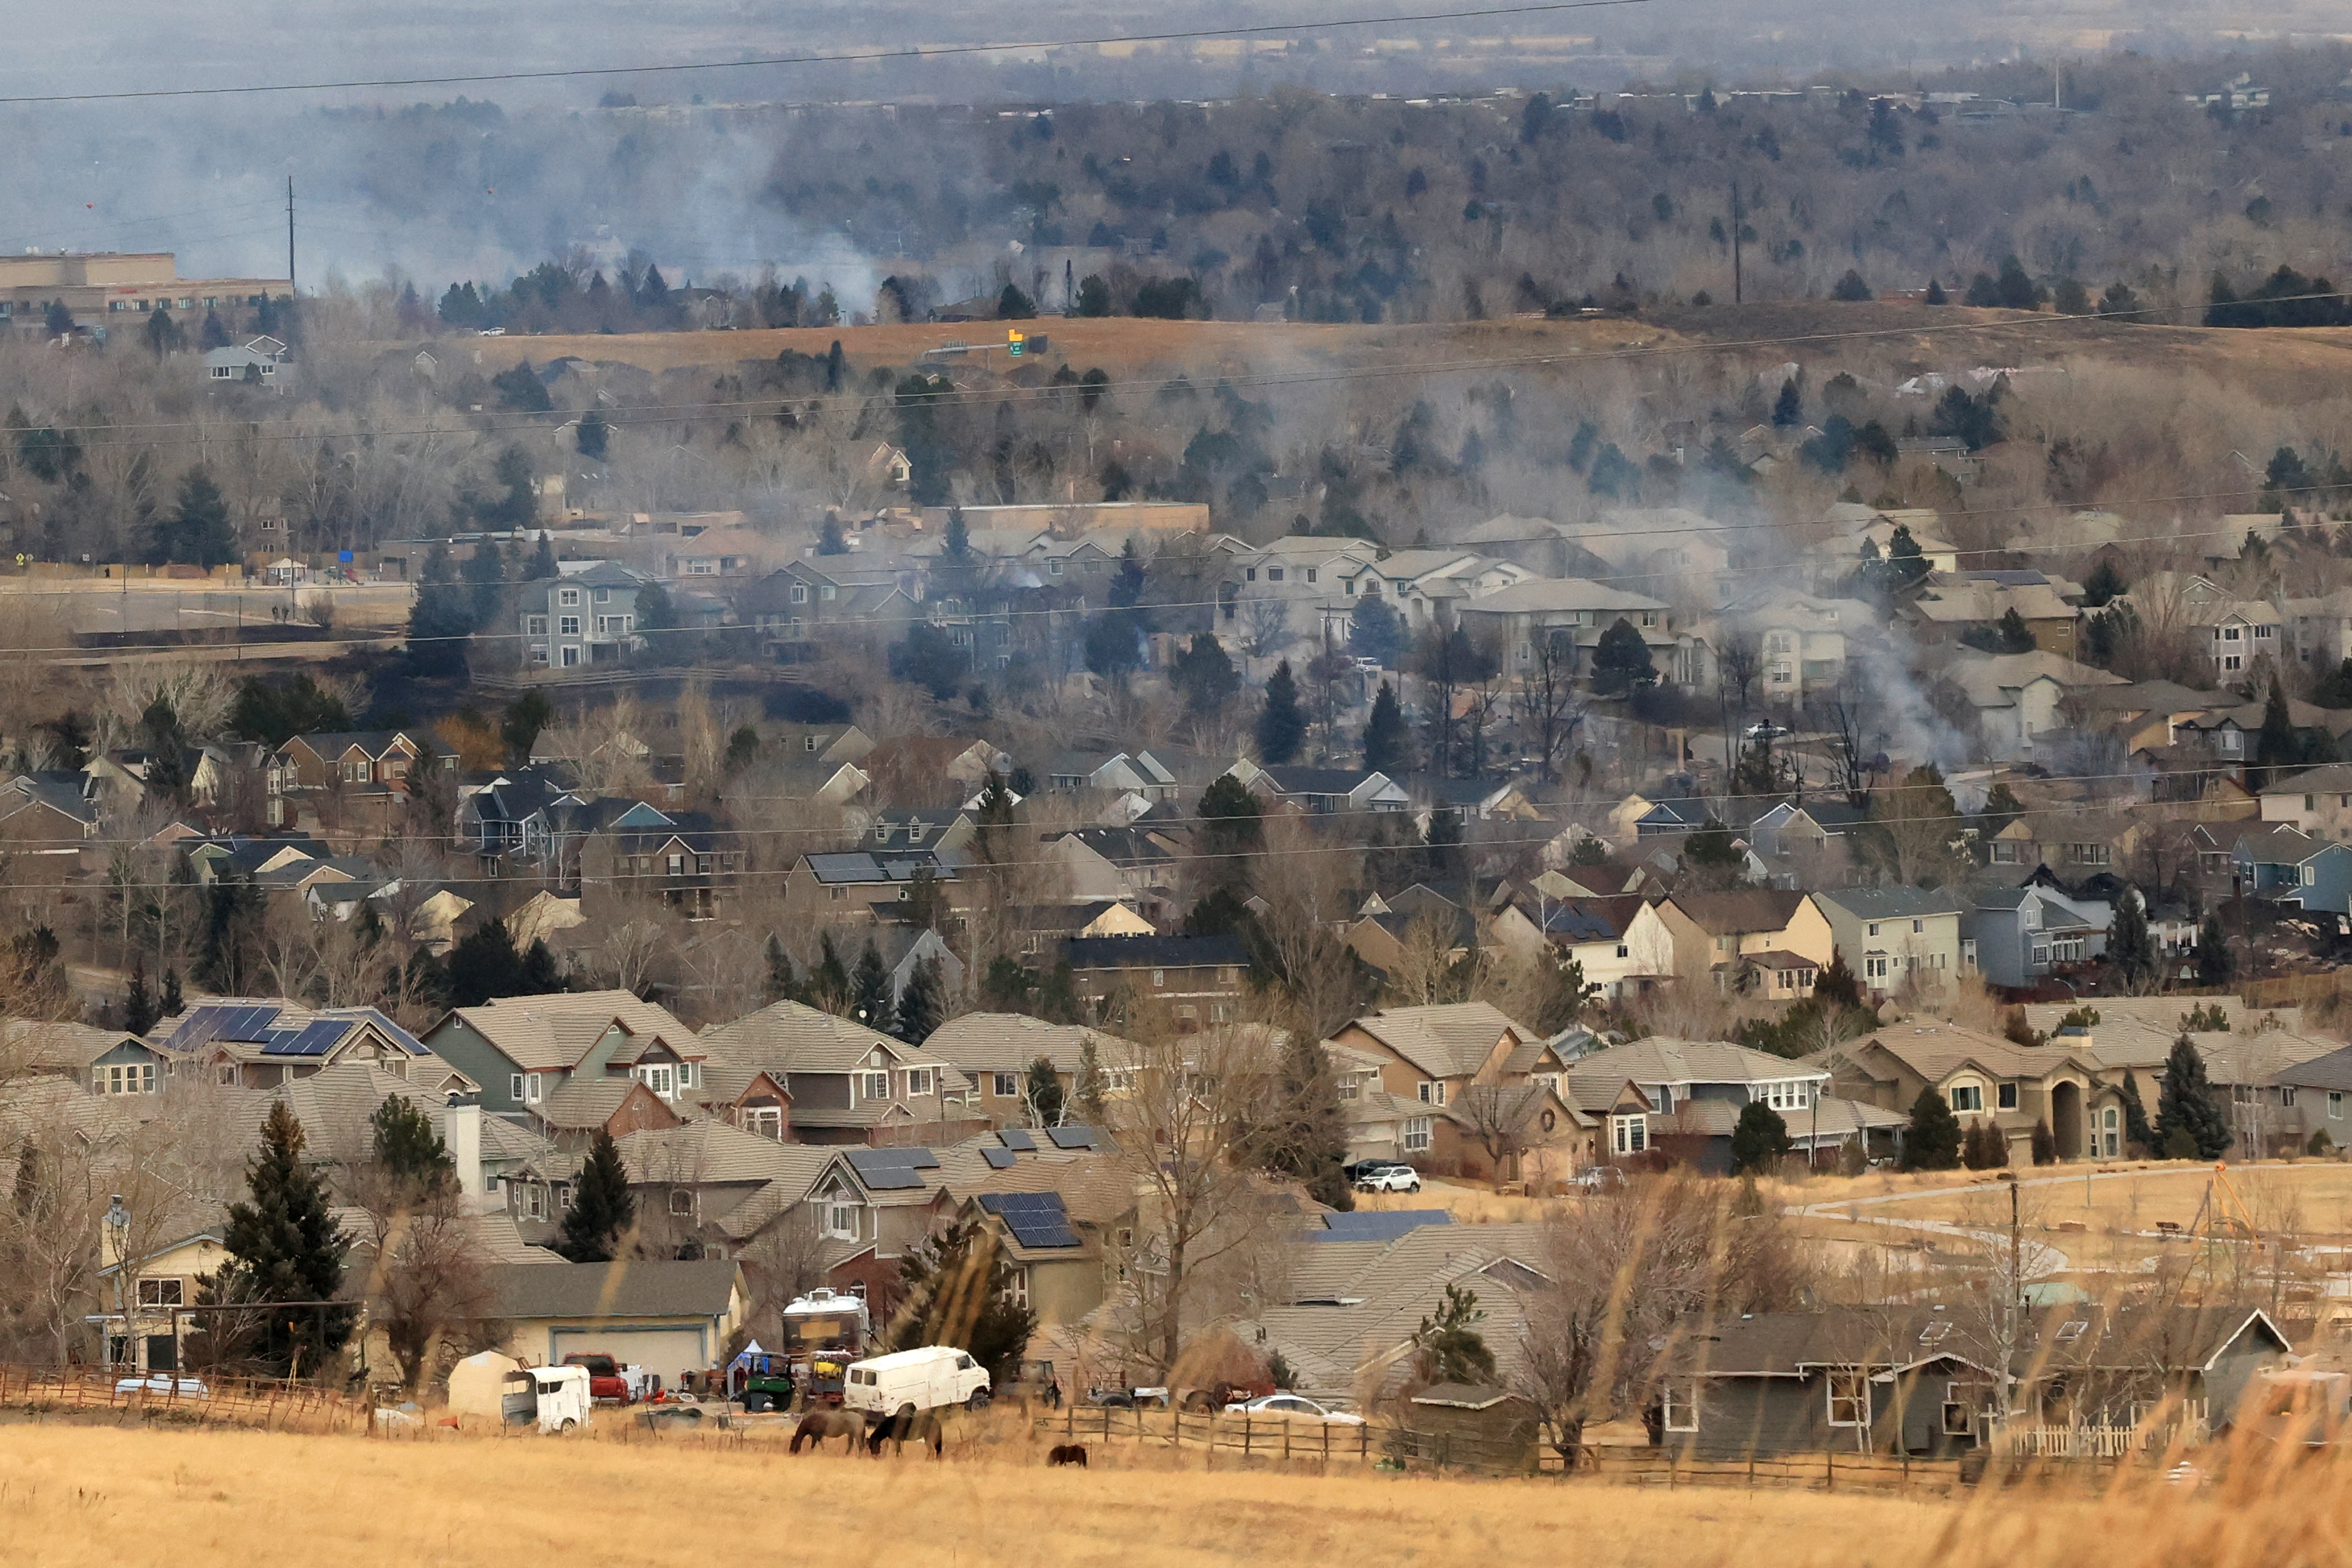 Smoke rises a day after wind-driven wildfires prompted evacuation orders in Superior